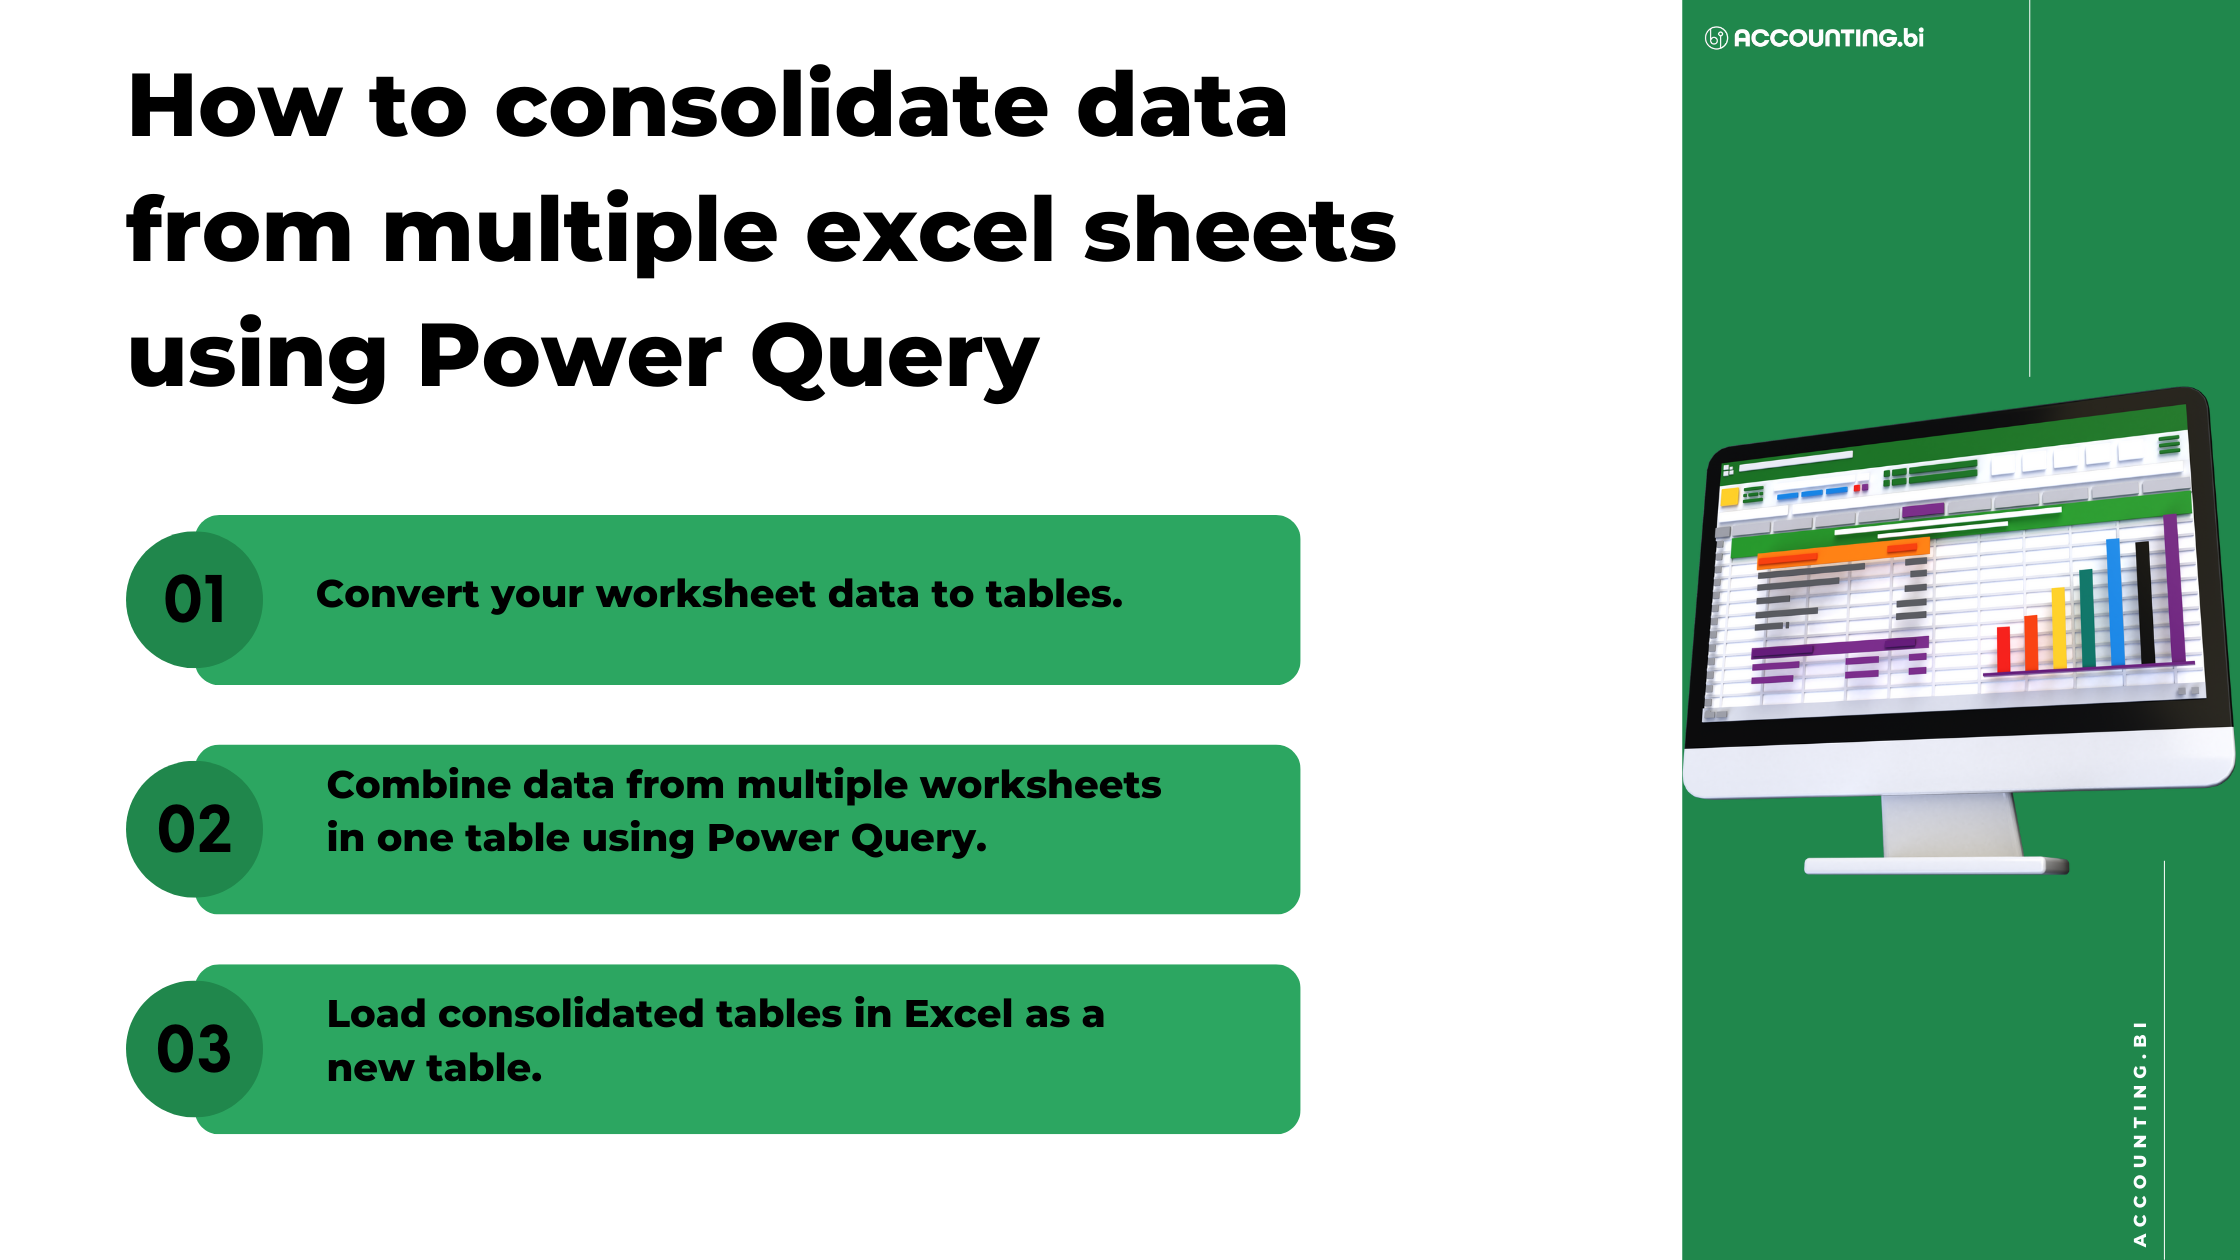 how-to-consolidate-data-from-multiple-excel-sheets-using-power-query